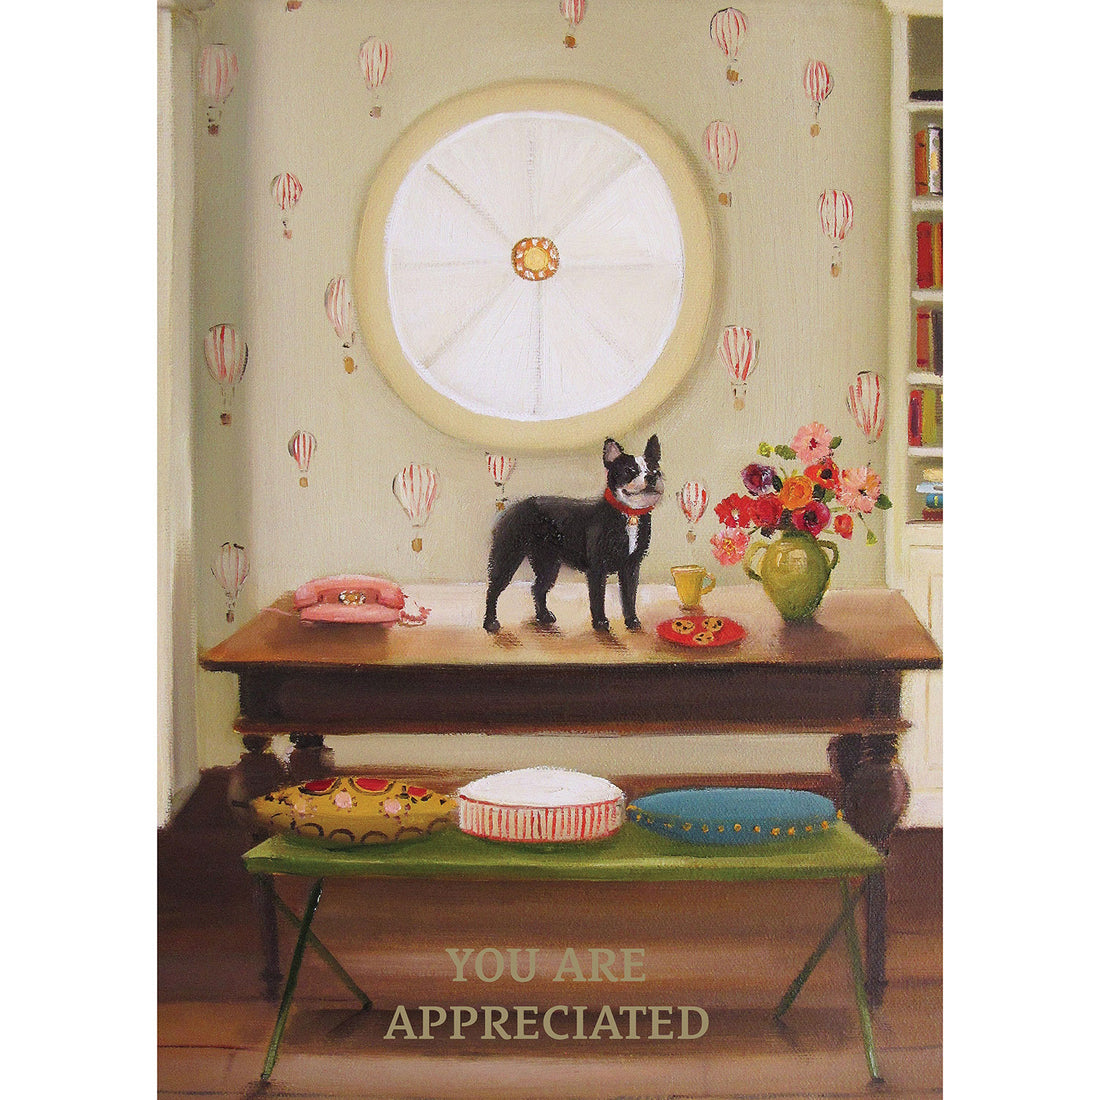 A painterly illustration of a Boston Terrier standing on a breakfast table in front of a large round window, next to a pink rotary phone, a vase of flowers, and a cup of coffee, with &quot;YOU ARE APPRECIATED&quot; printed along the bottom of the card.